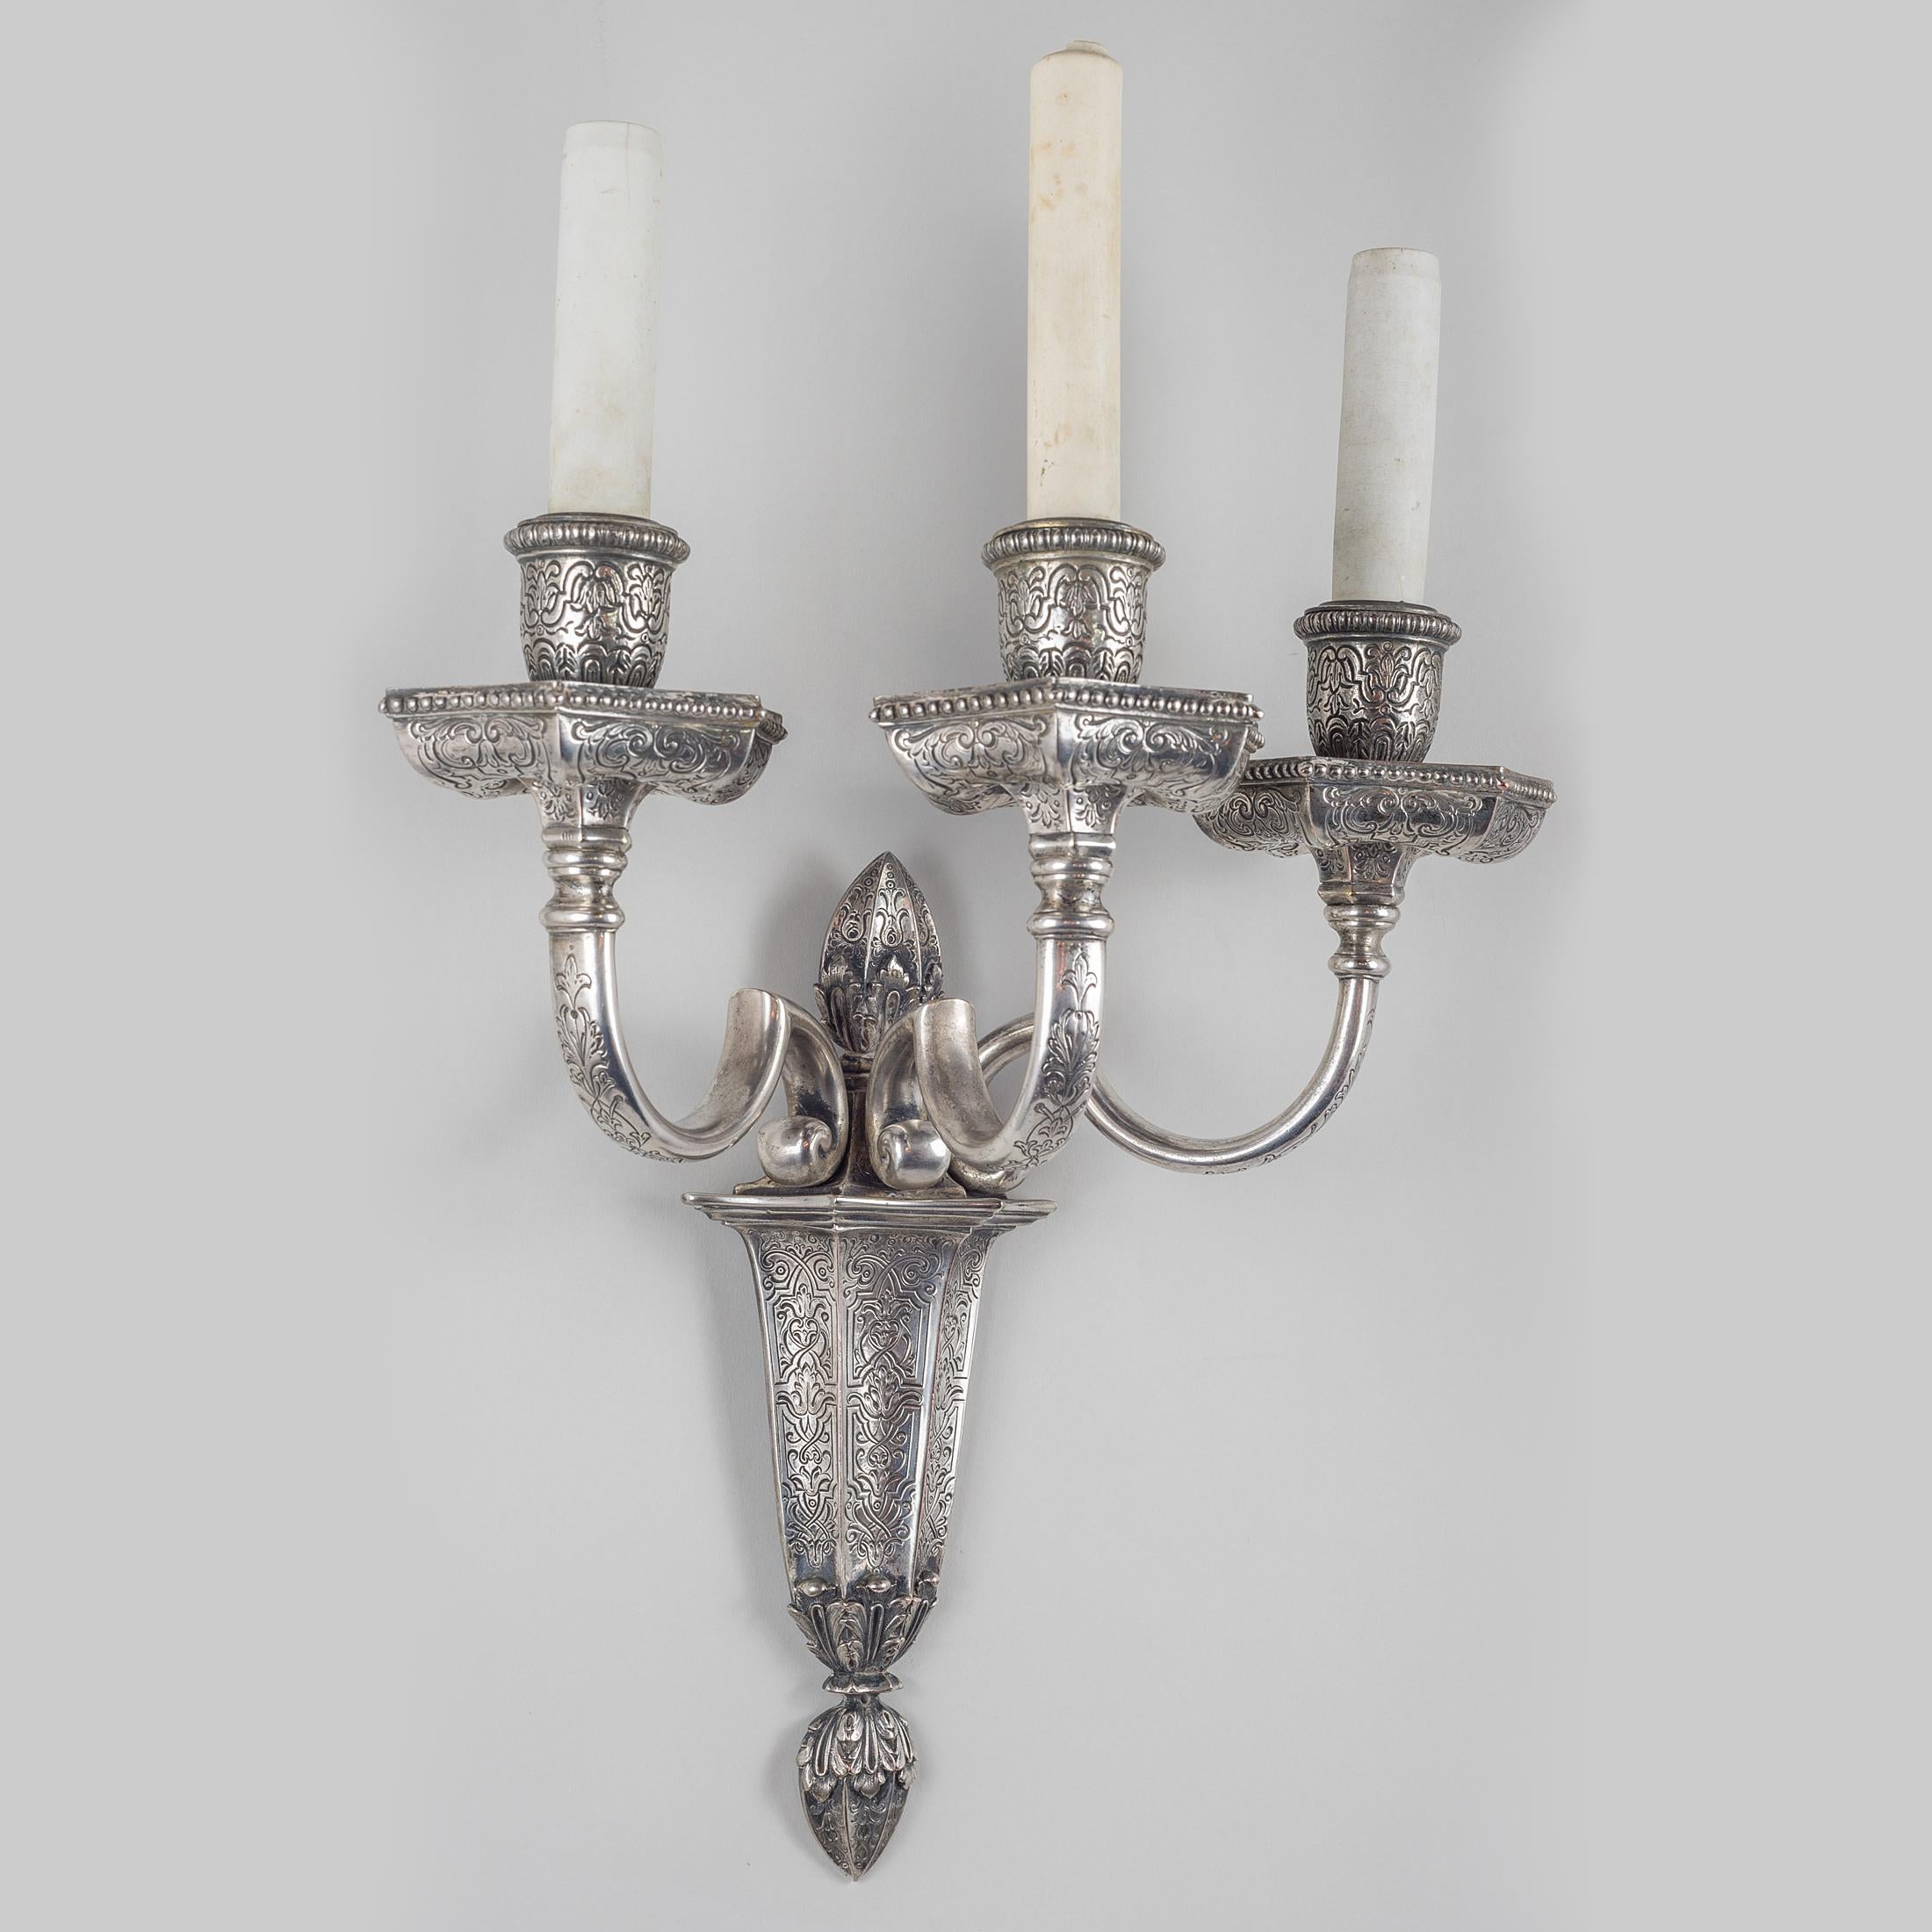 A fine quality pair of silvered bronze three-light caldwell sconces in Moorish style with engraved and cast decoration.

Maker: Edward F. Caldwell Co. (1851-1914) 
Origin: American
Date: 19th century
Dimension: 20 inches high; 8 inches depth.